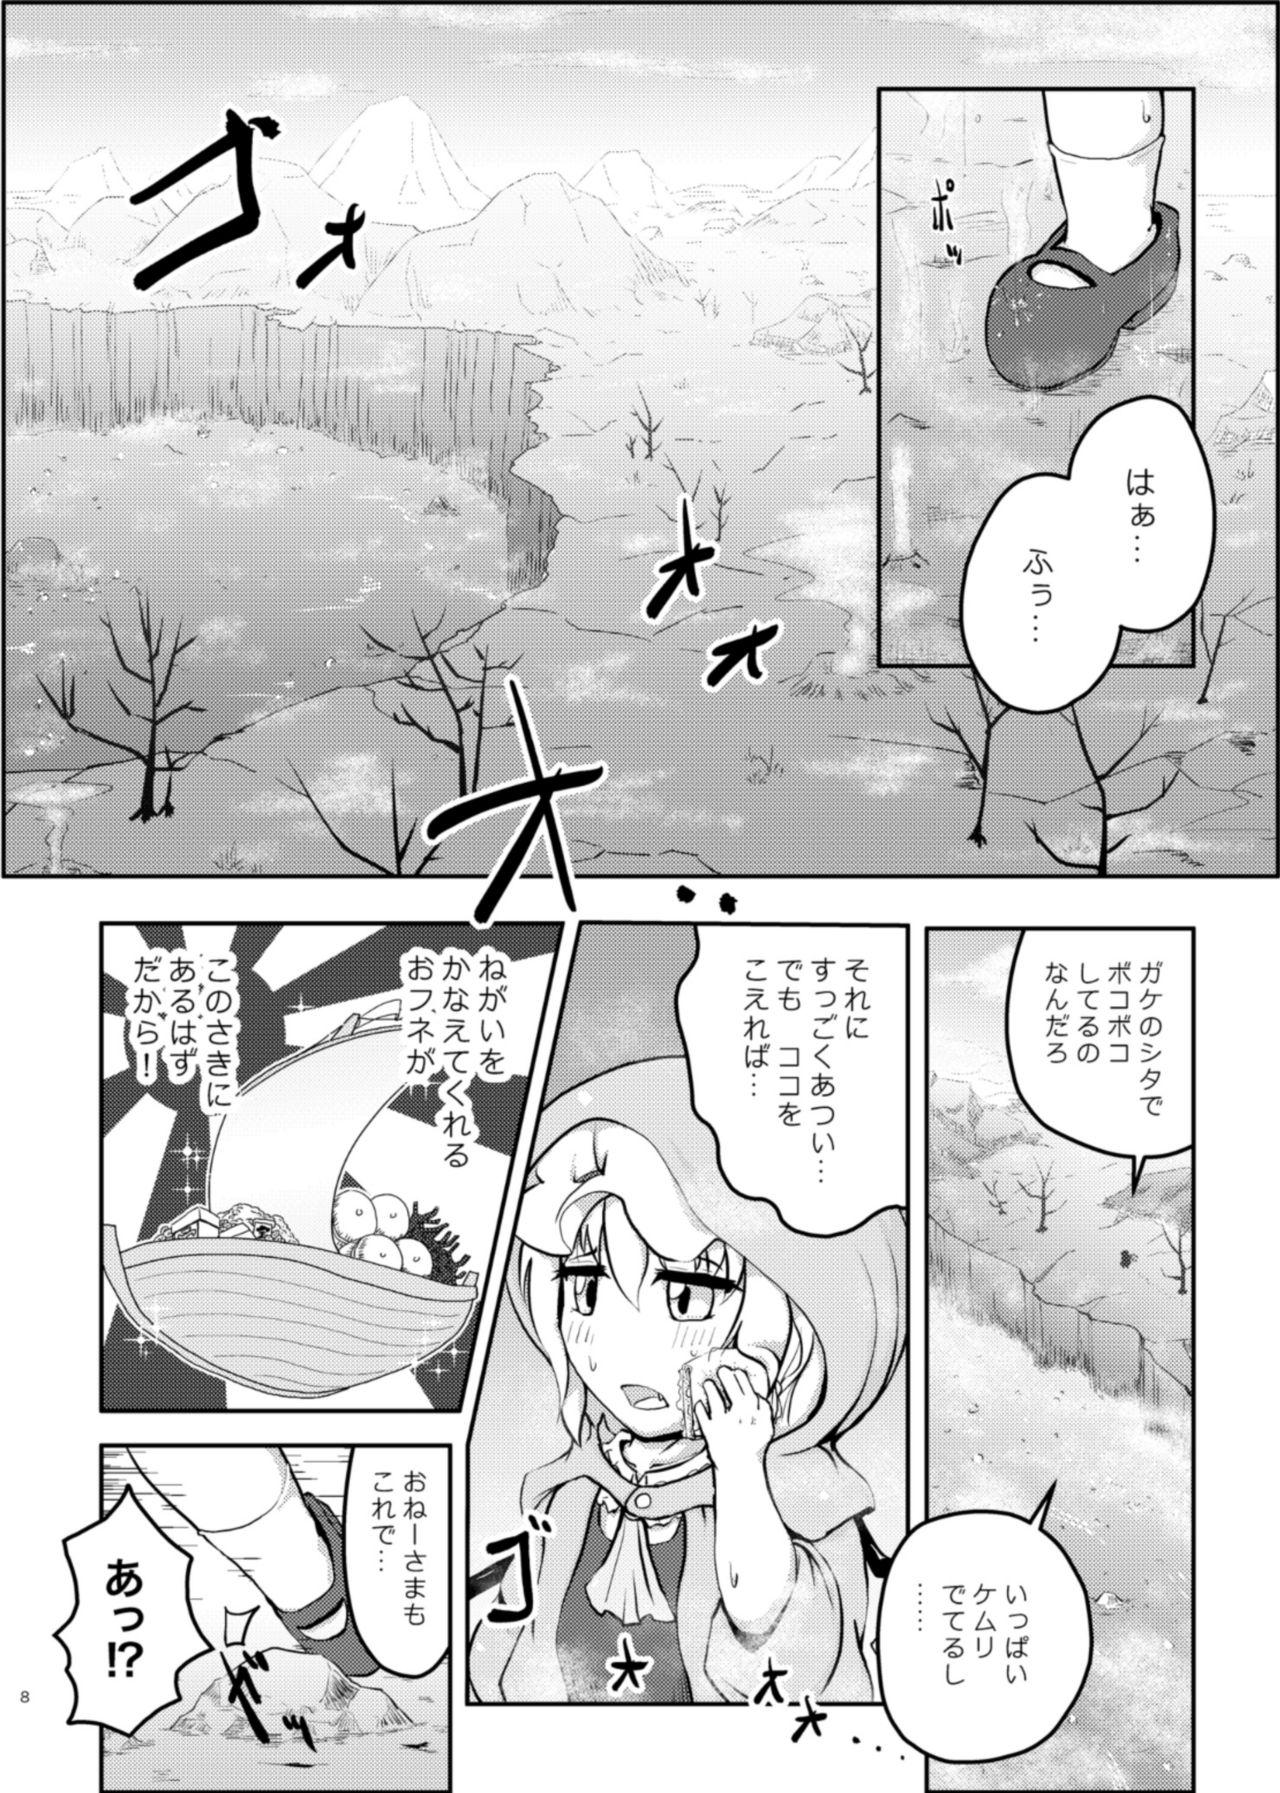 Tgirl Scarlet Conflict 2 - Touhou project Dirty Talk - Page 8